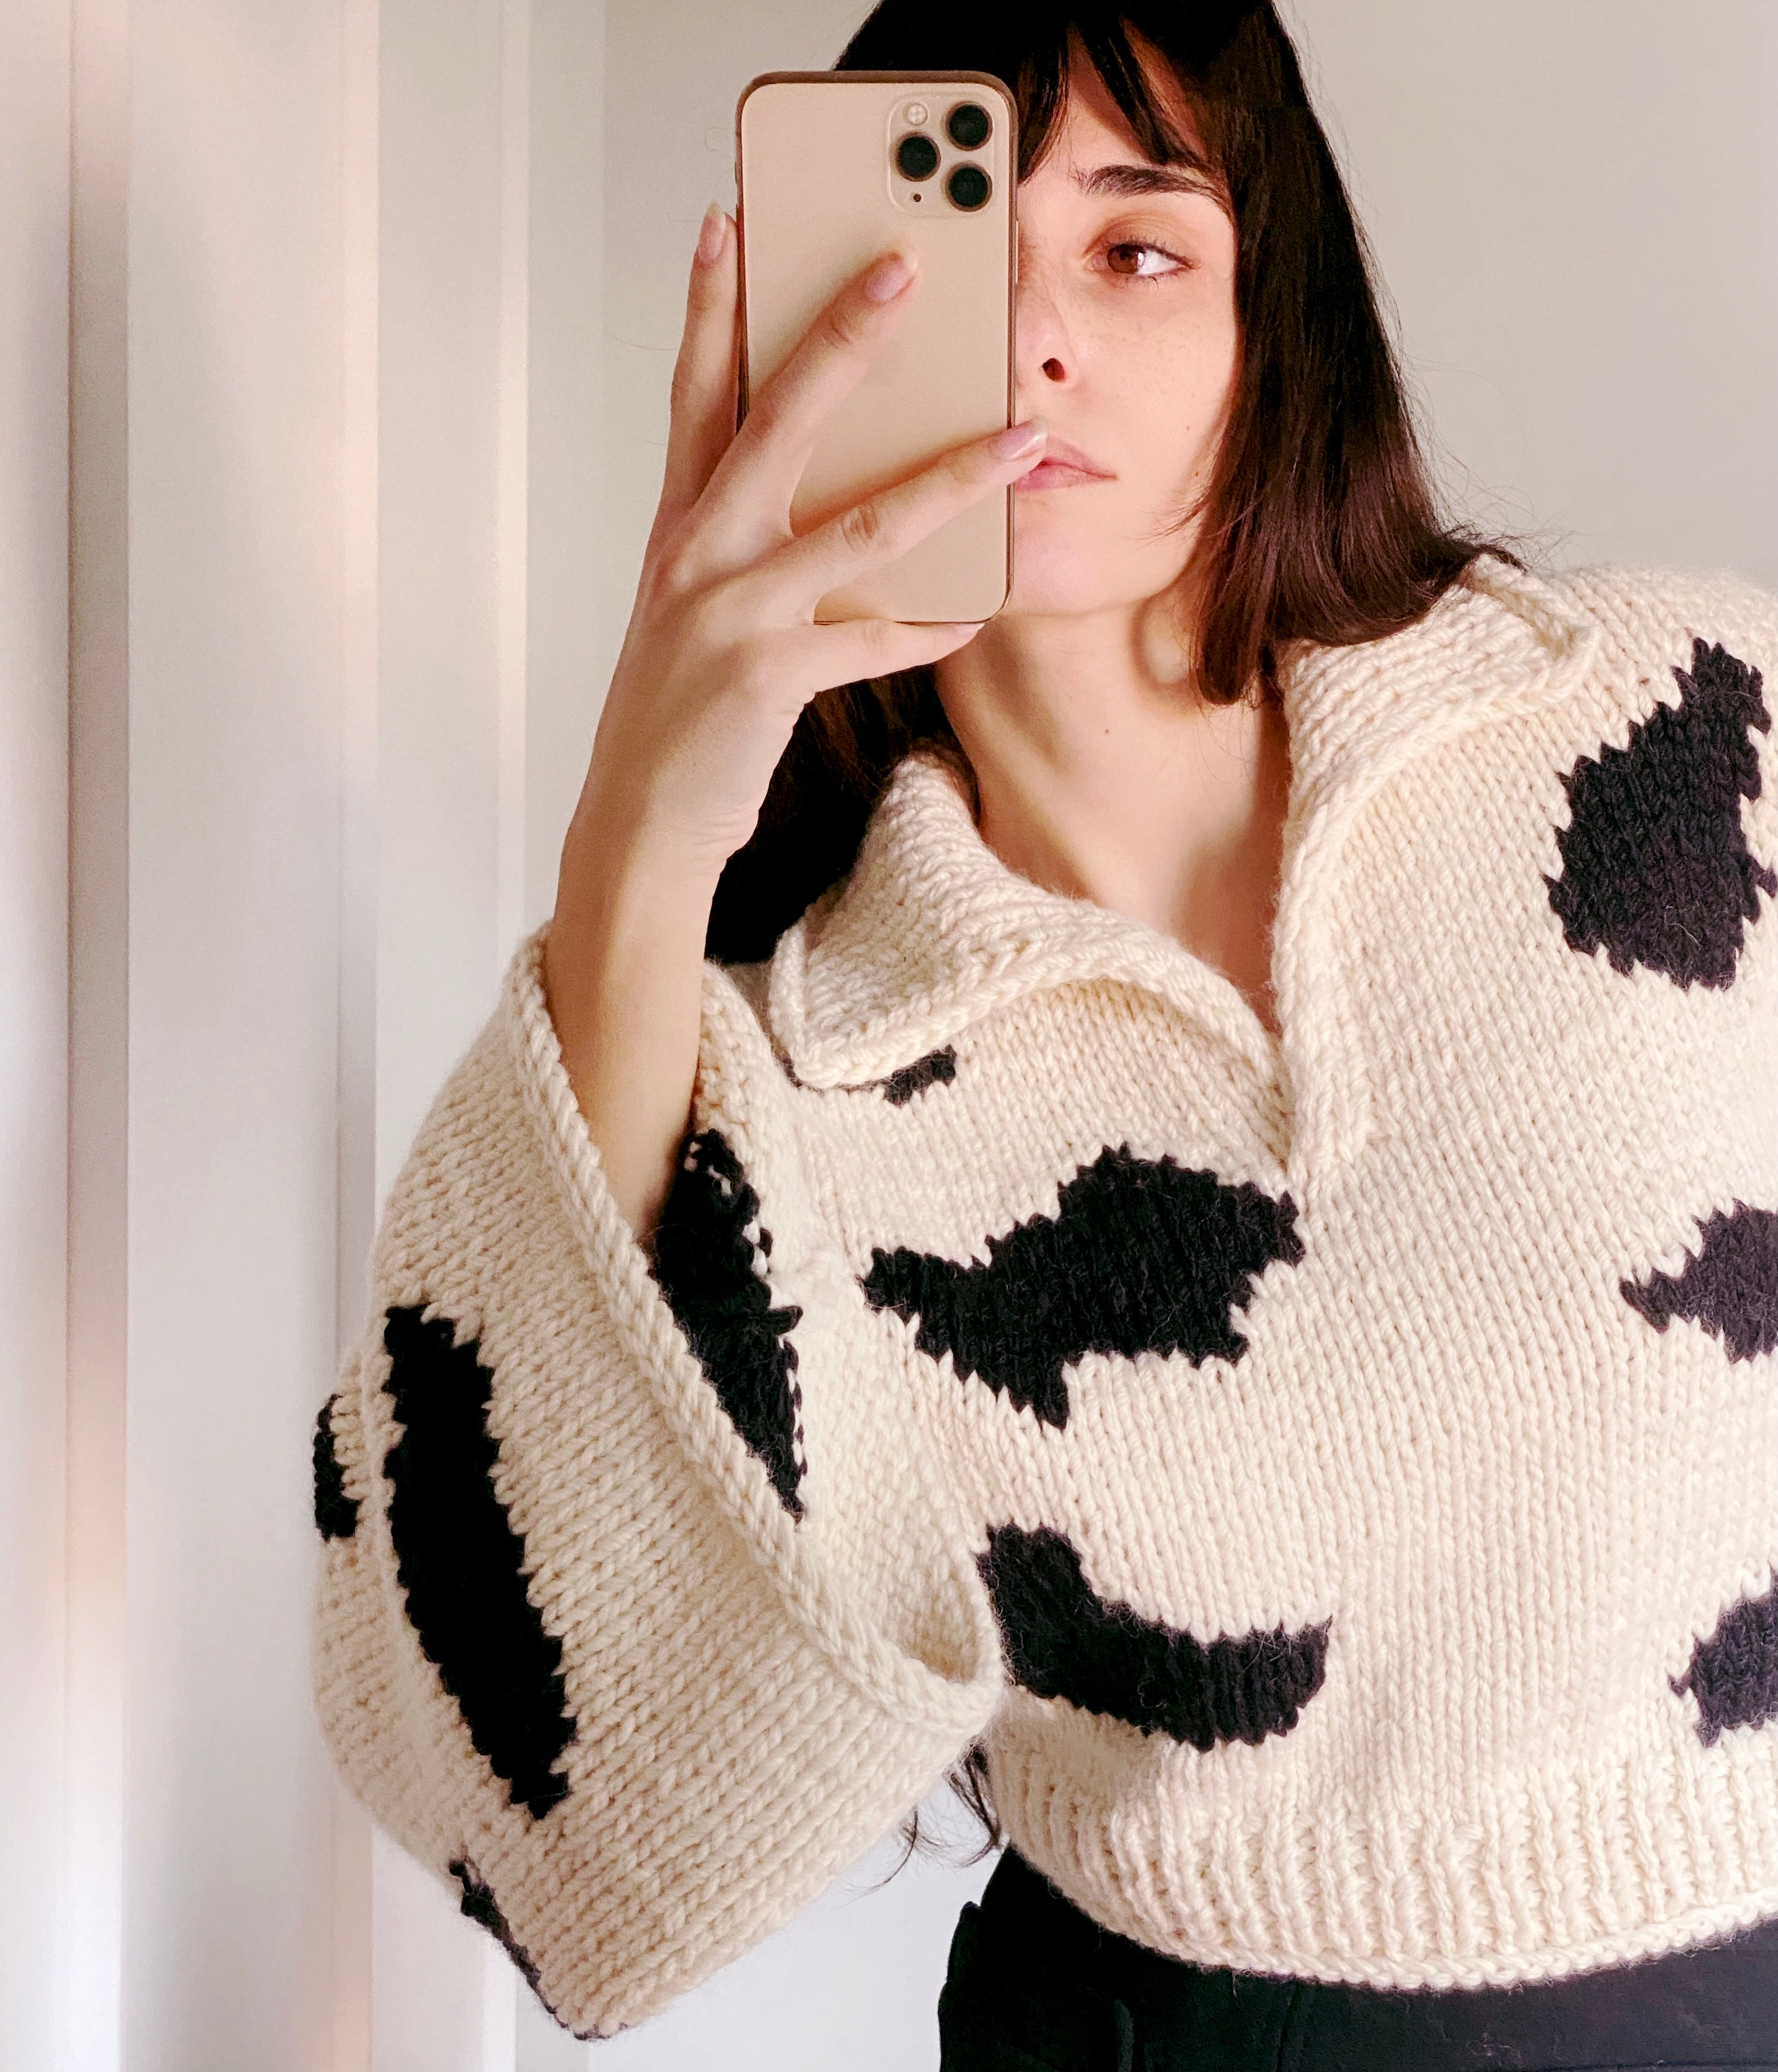 Holy Cow hand-knitted sweater